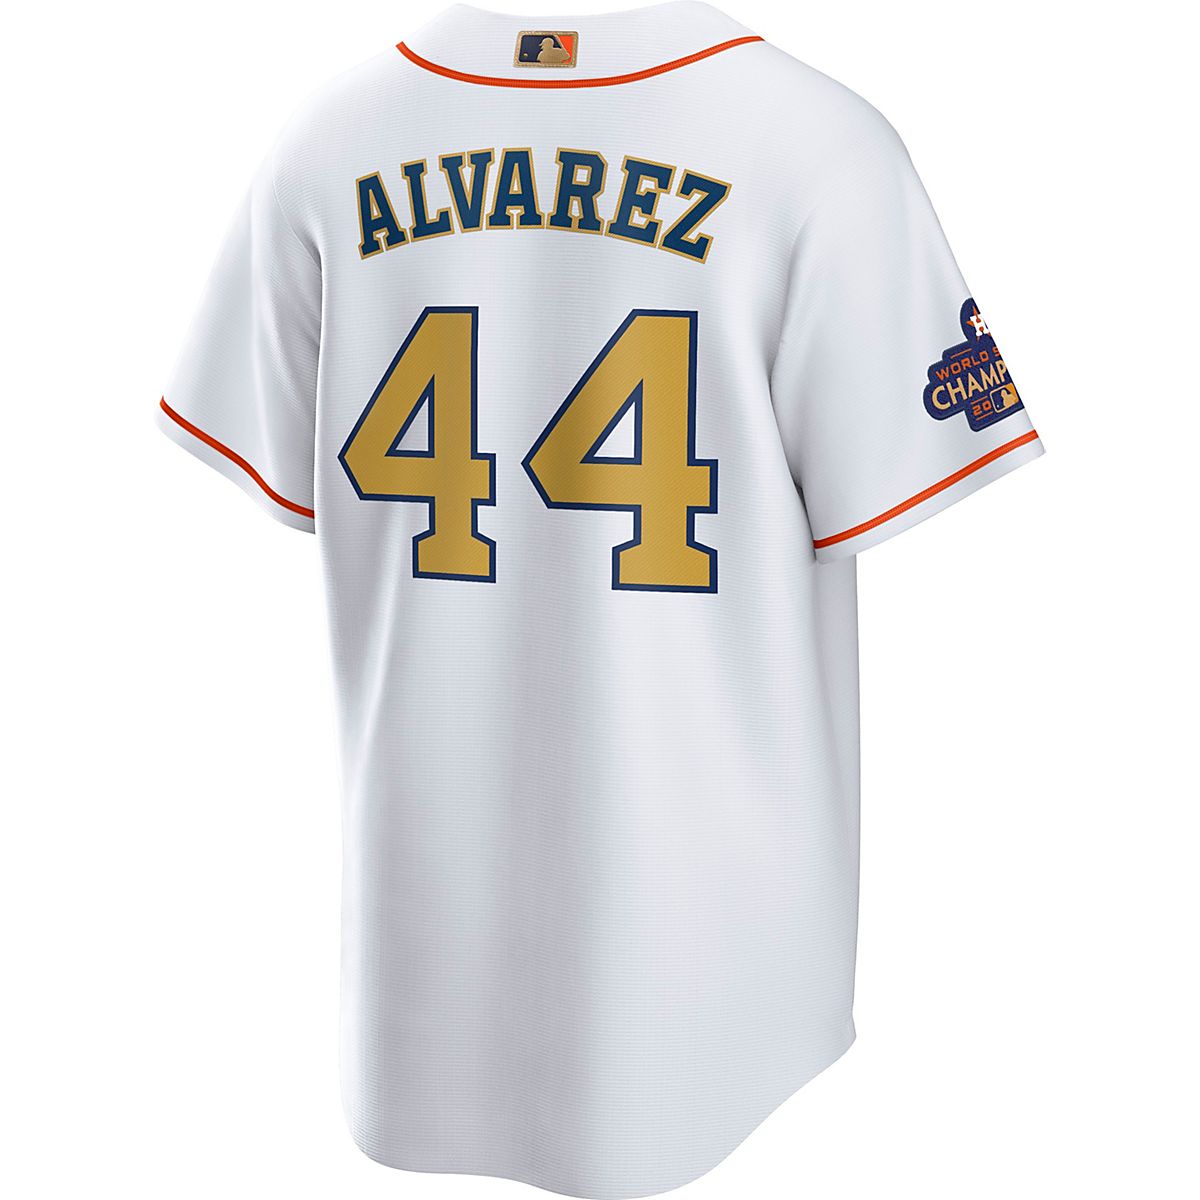 Nike Men’s Houston Astros Alvarez Gold Name and Number Graphic T-Shirt Navy Blue, Small - MLB Apparel Events at Academy Sports